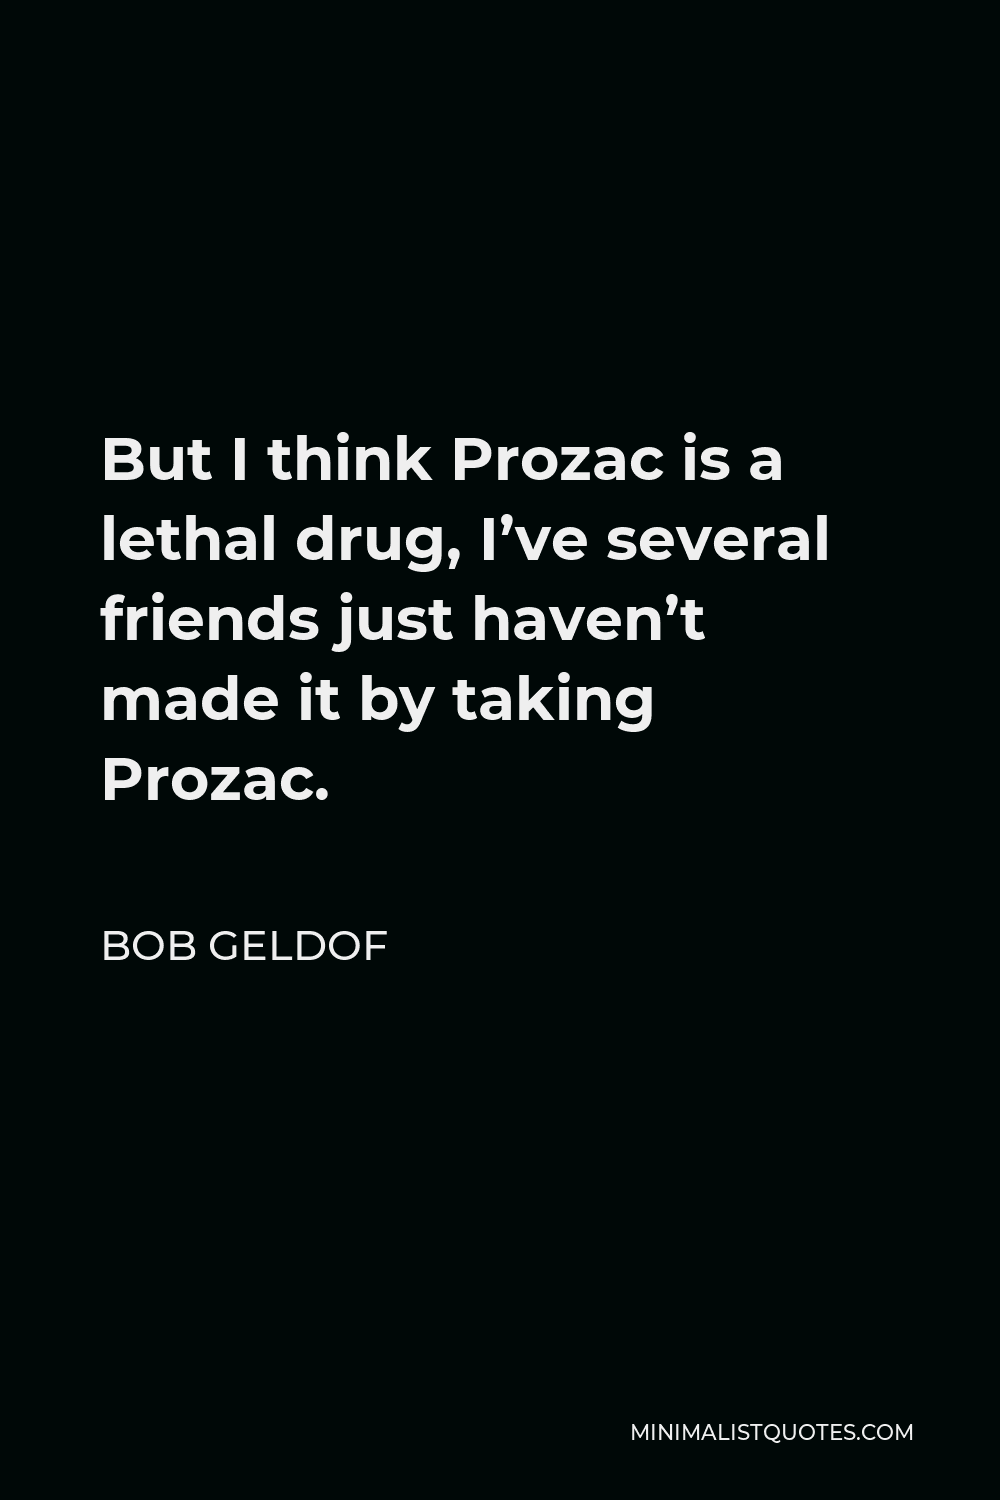 Bob Geldof Quote - But I think Prozac is a lethal drug, I’ve several friends just haven’t made it by taking Prozac.